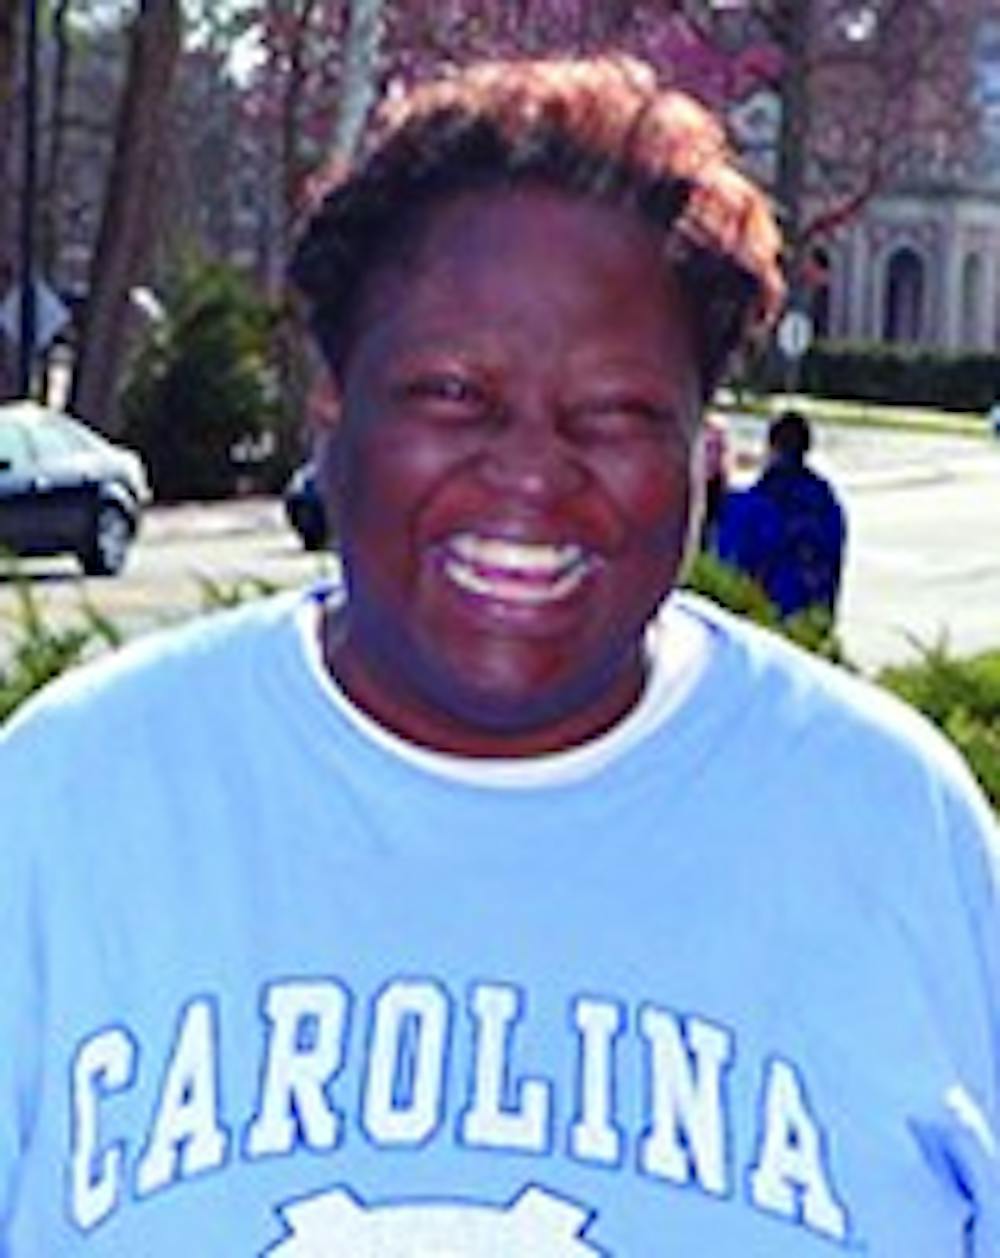 	Wanda Mcclamb was known for her outgoing and friendly personality. She died of surgical complications weeks after a kidney transplant. 